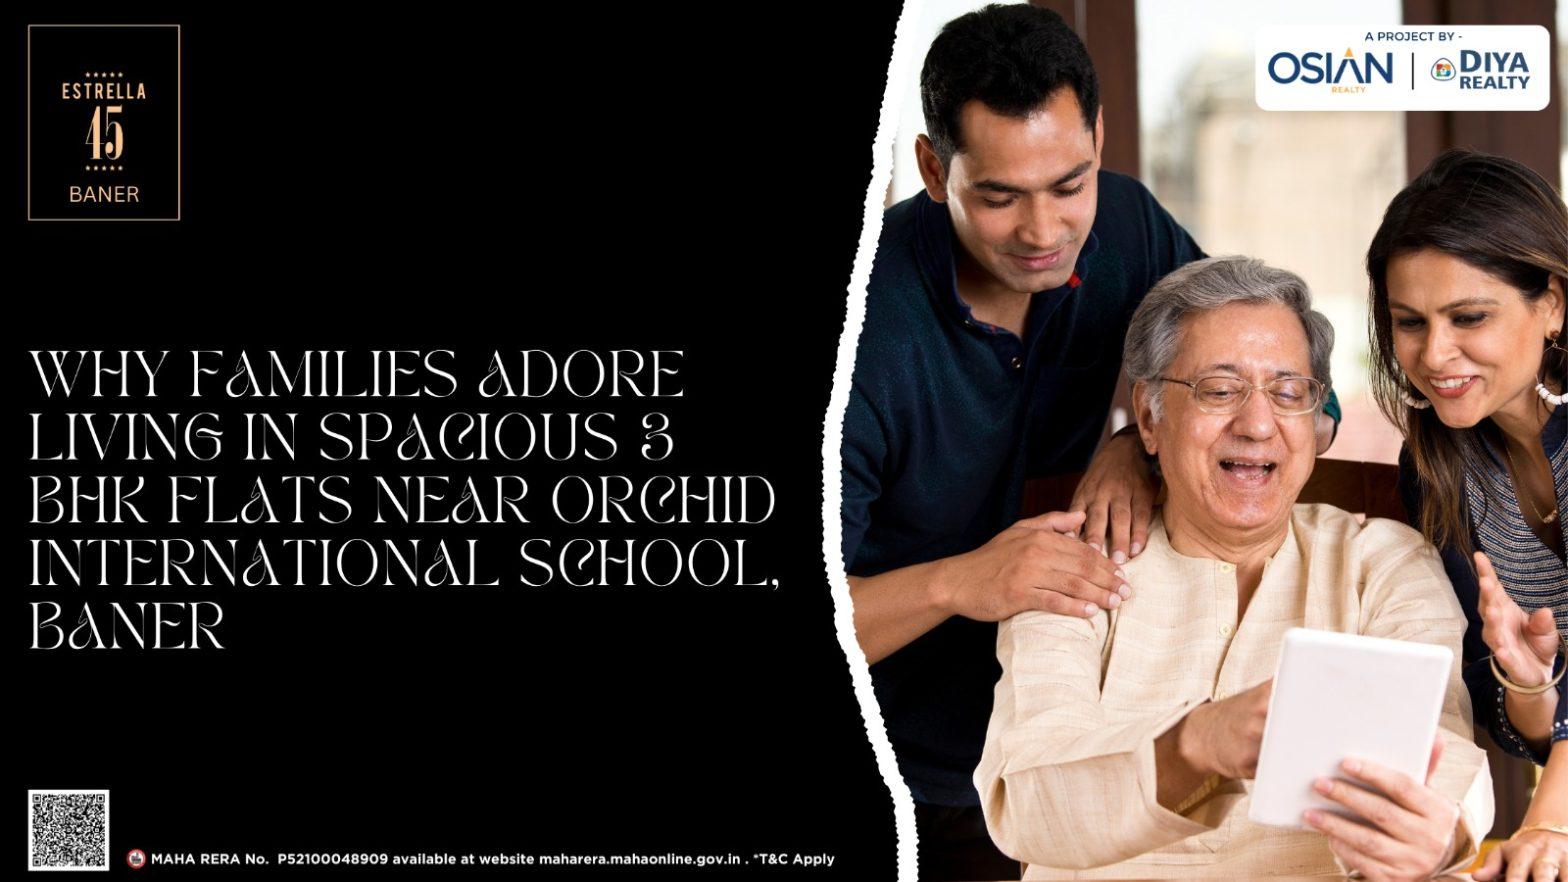 Why Families Adore Living in Spacious 3 BHK Flats near Orchid International School, Baner